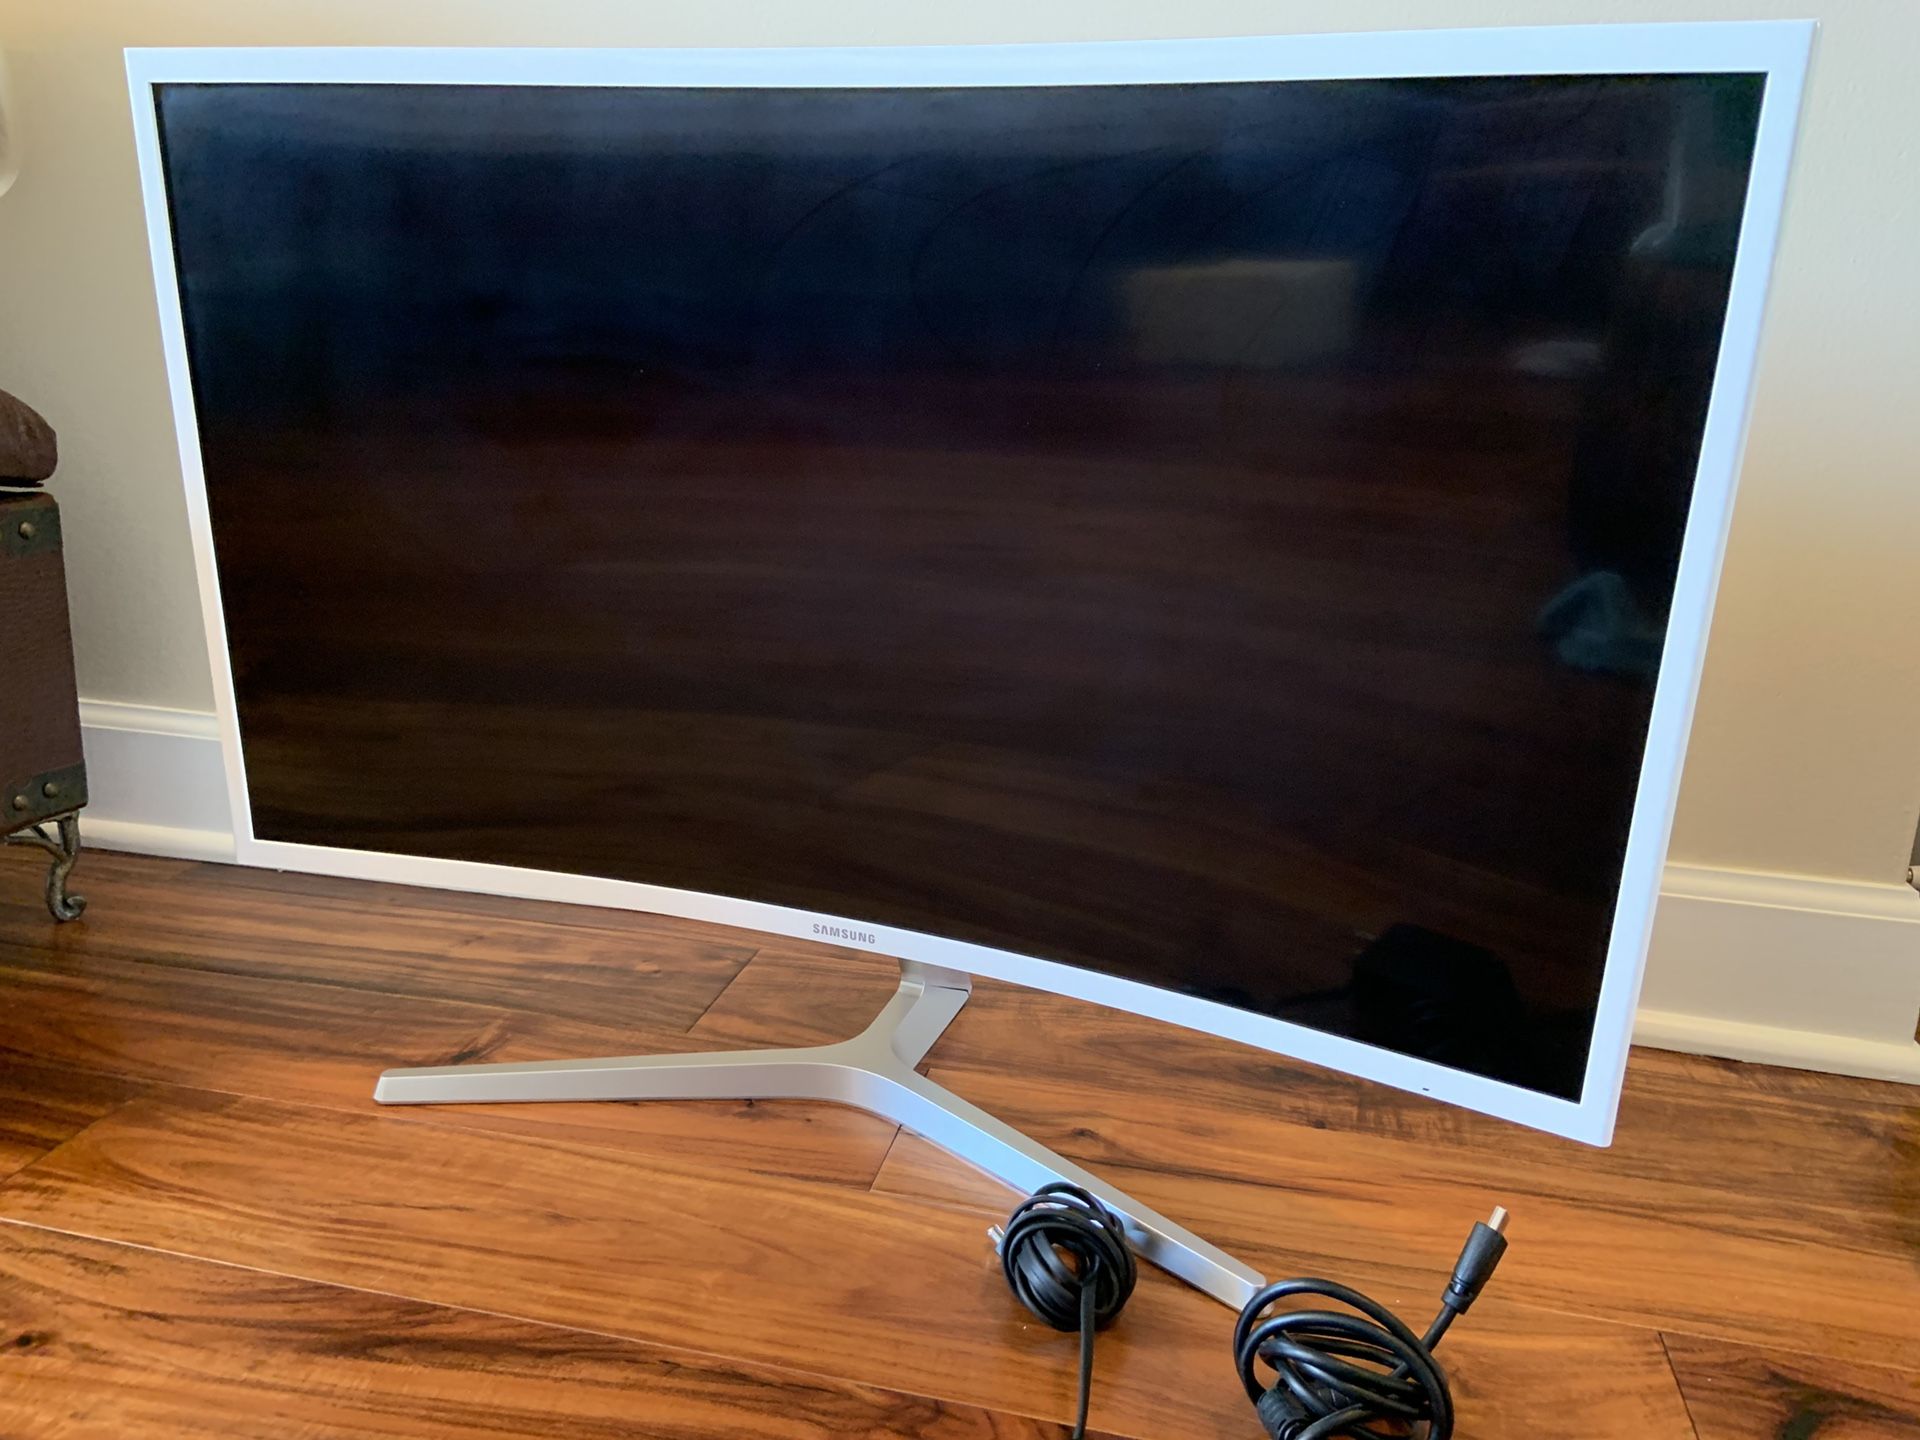 Brand new Samsung CF391 curved monitor 32” LED, glossy white